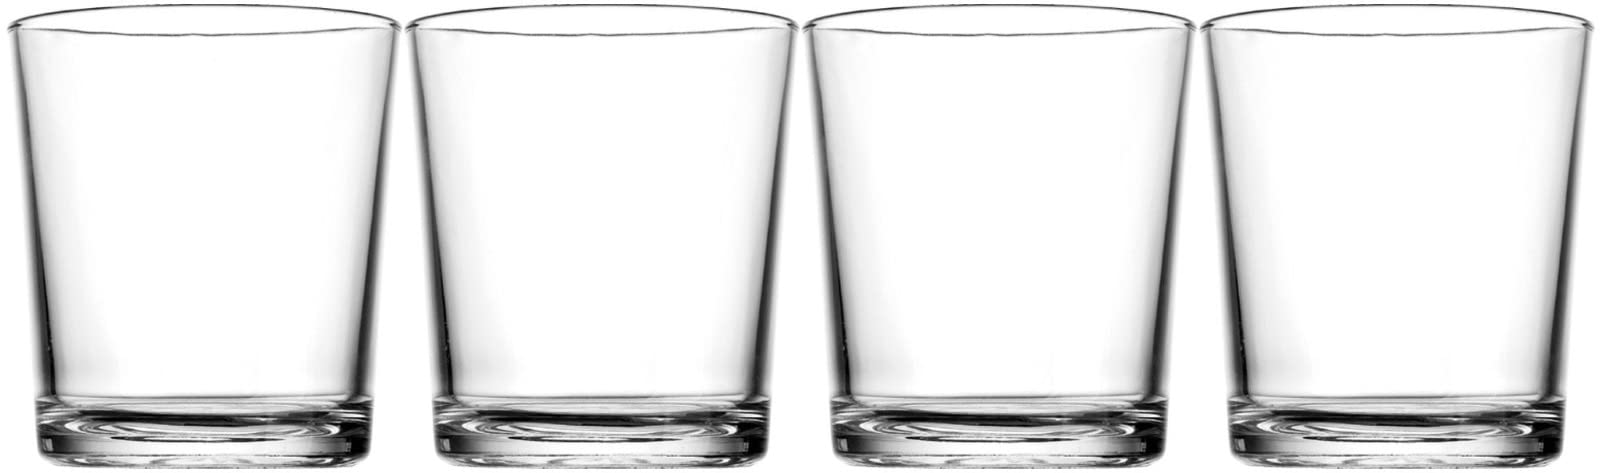 Glaver's Whiskey Glasses Set of 4, 13 oz. Barware, Old Fashioned Glasses for, Whisky, Juice, Scotch, Bourbon, Liquor, and Cocktails.